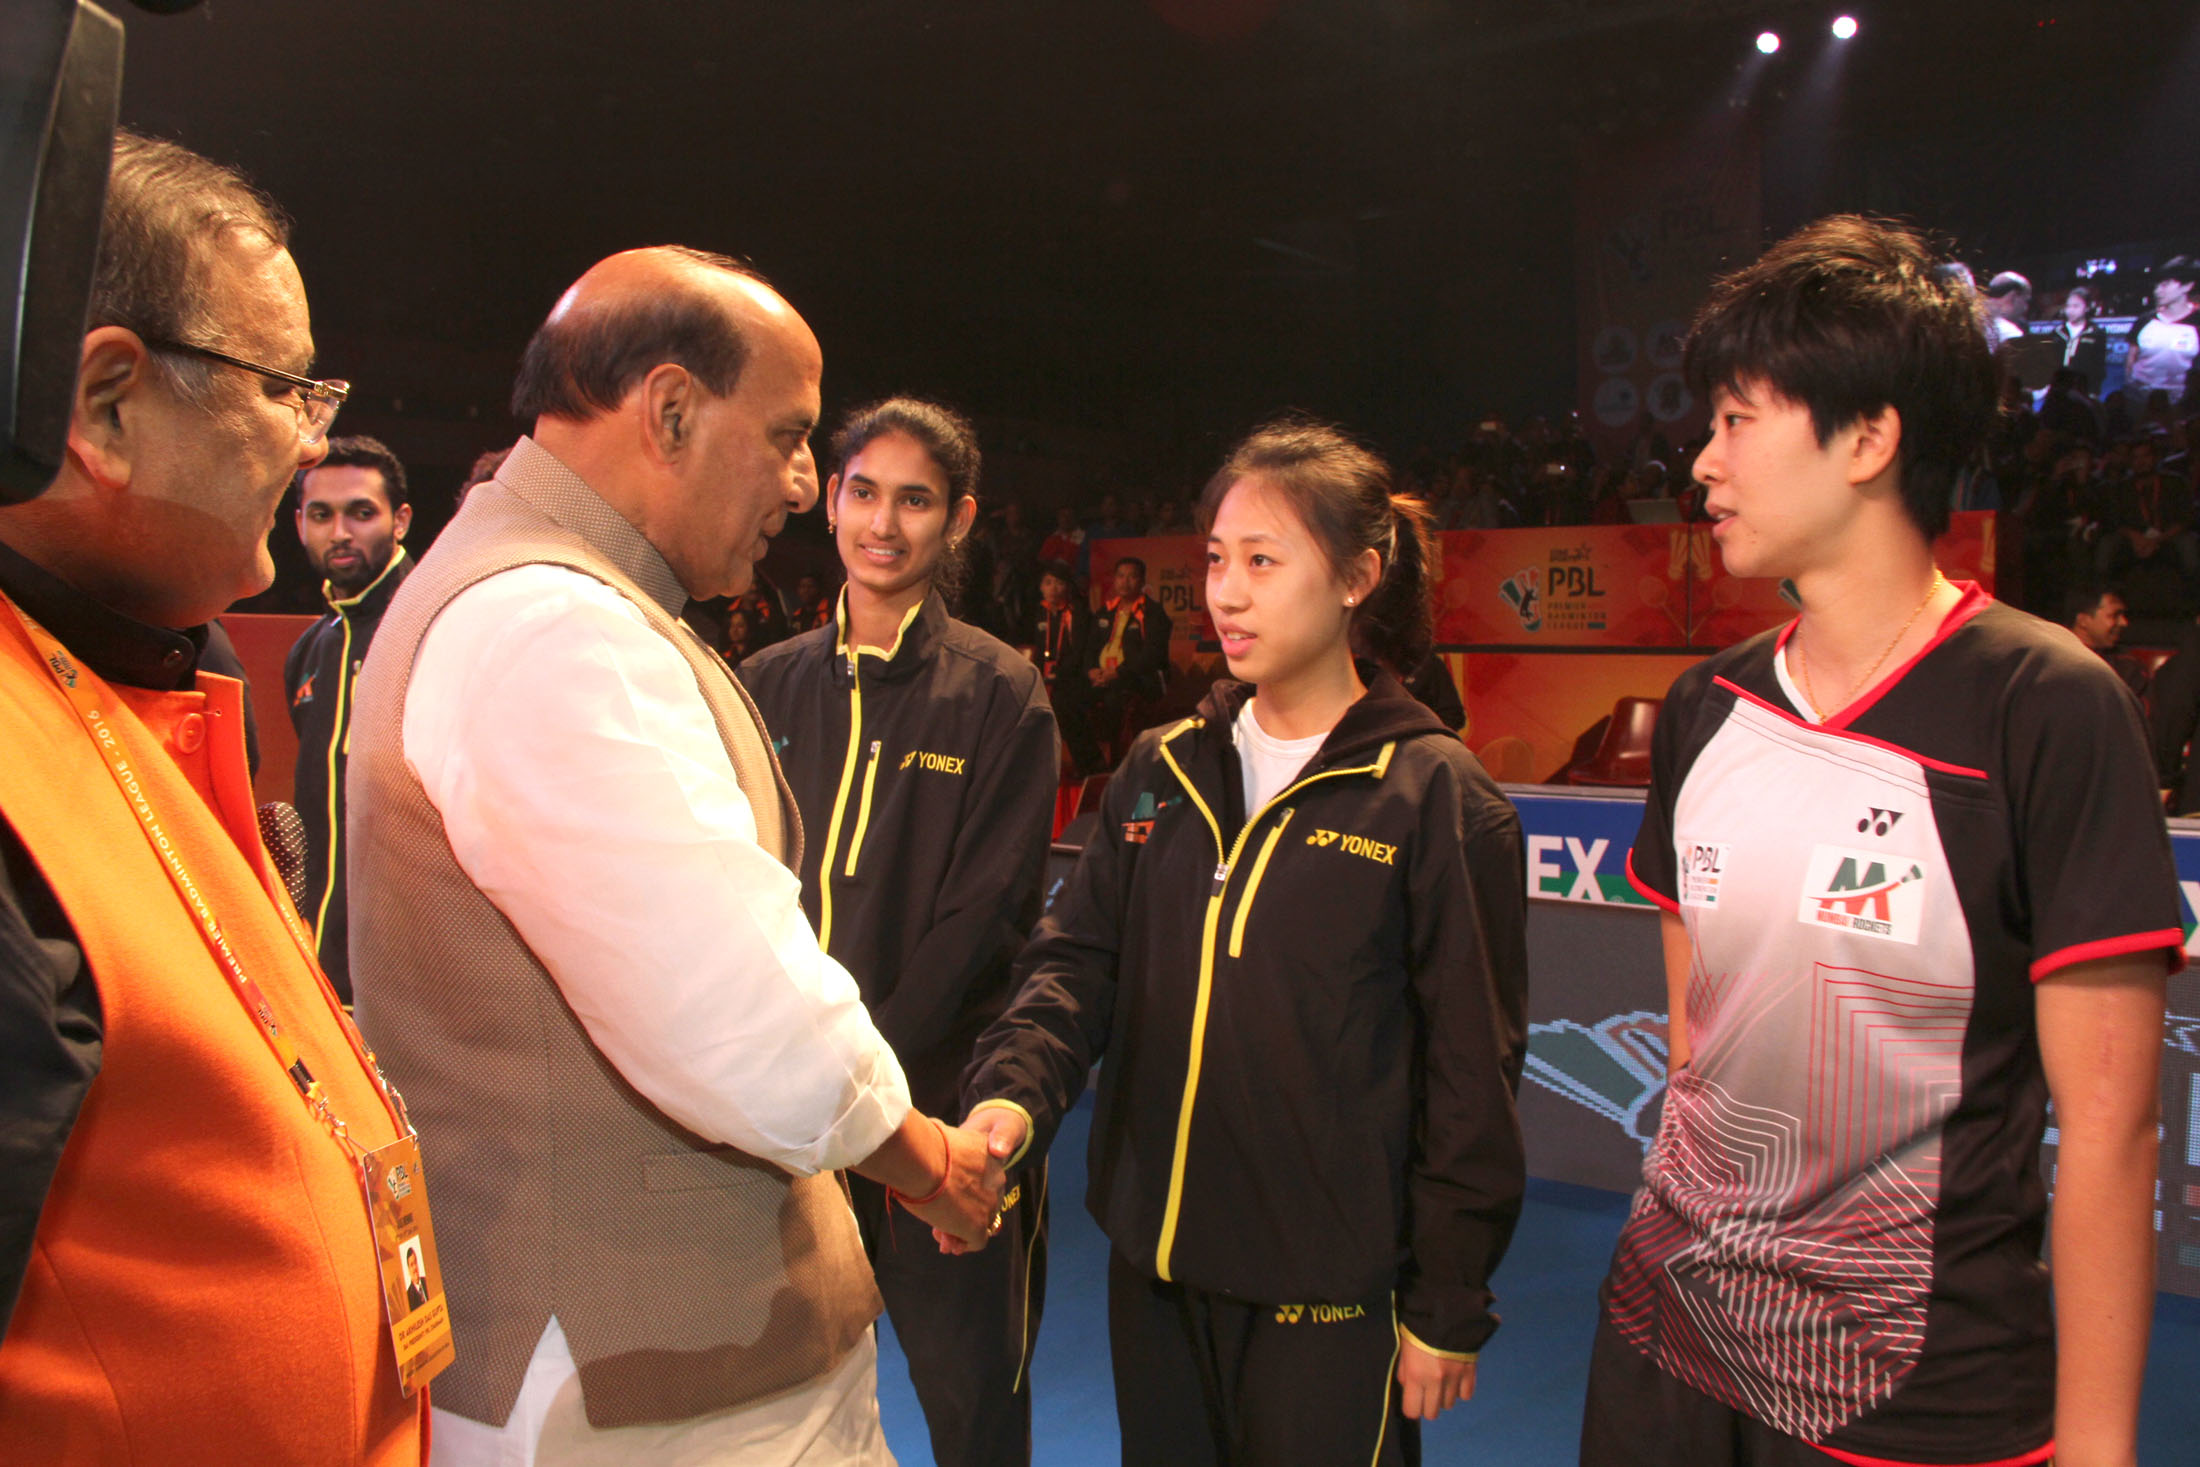 The Union Home Minister, Shri Rajnath Singh being introduced to the players, during the final day of the Premier Badminton League, in New Delhi on January 17, 2016.